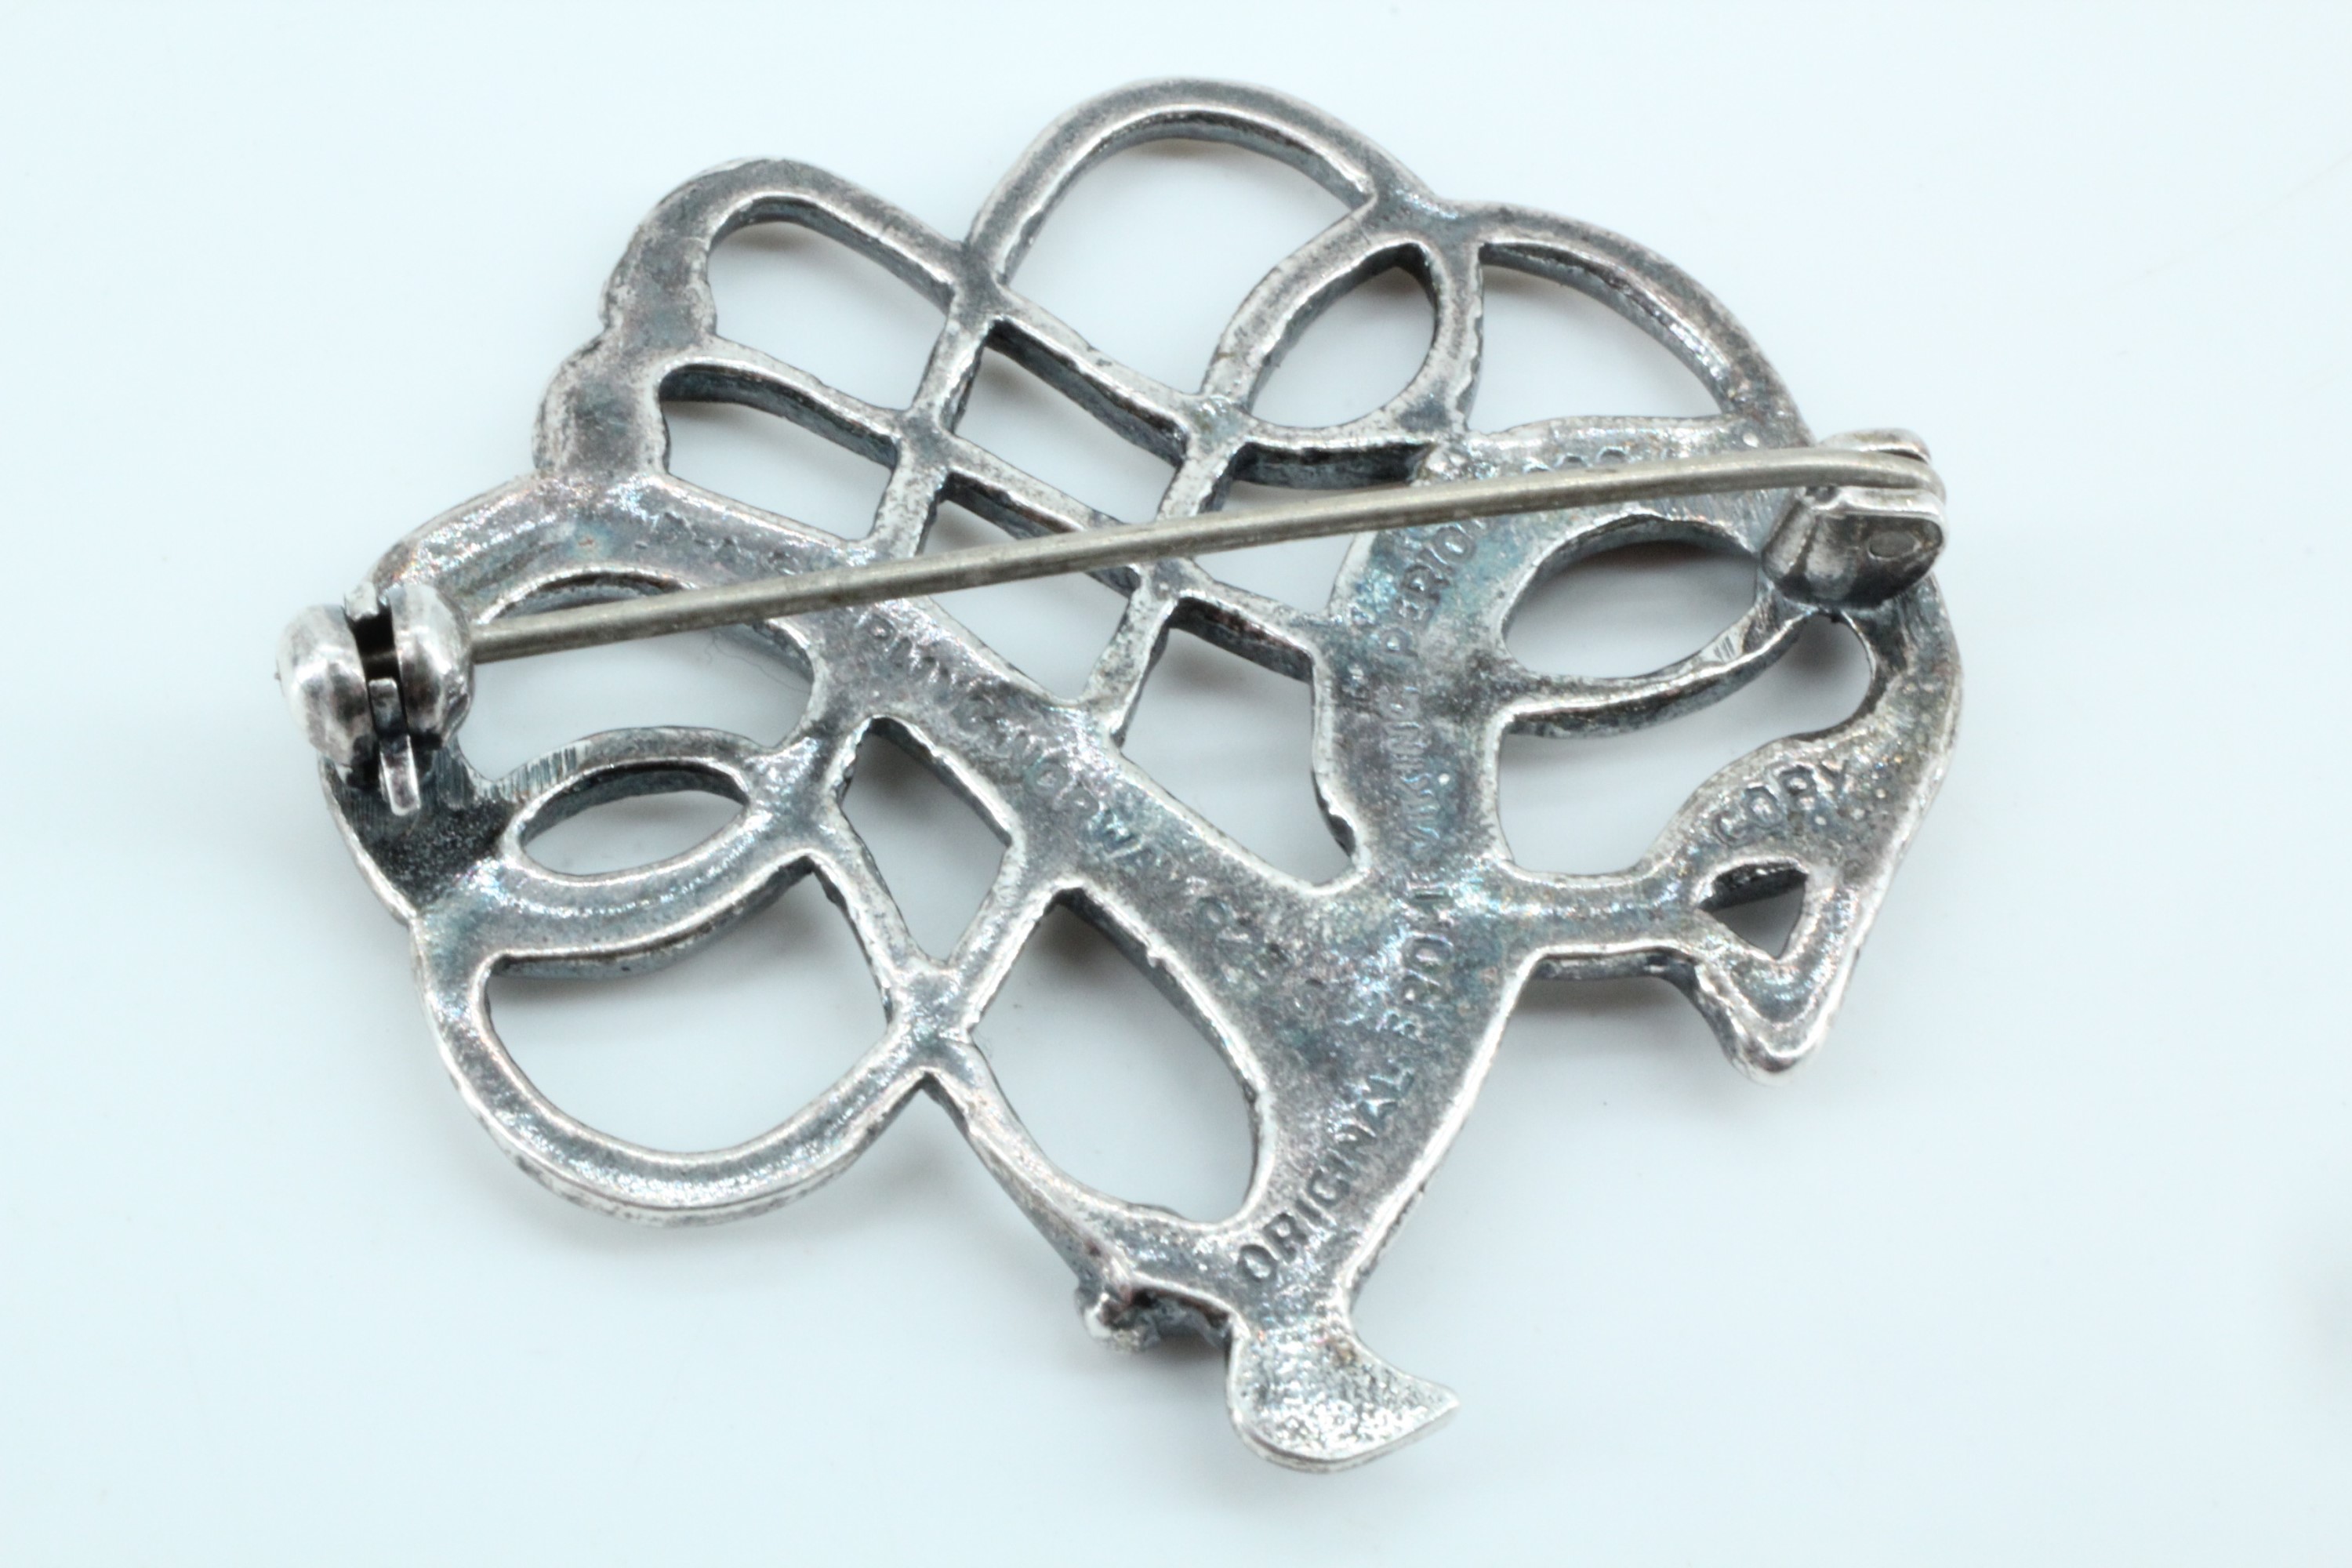 David-Anderson, a brooch from the Saga series in the manner of a Viking brooch, 1960s, marked - Image 2 of 2